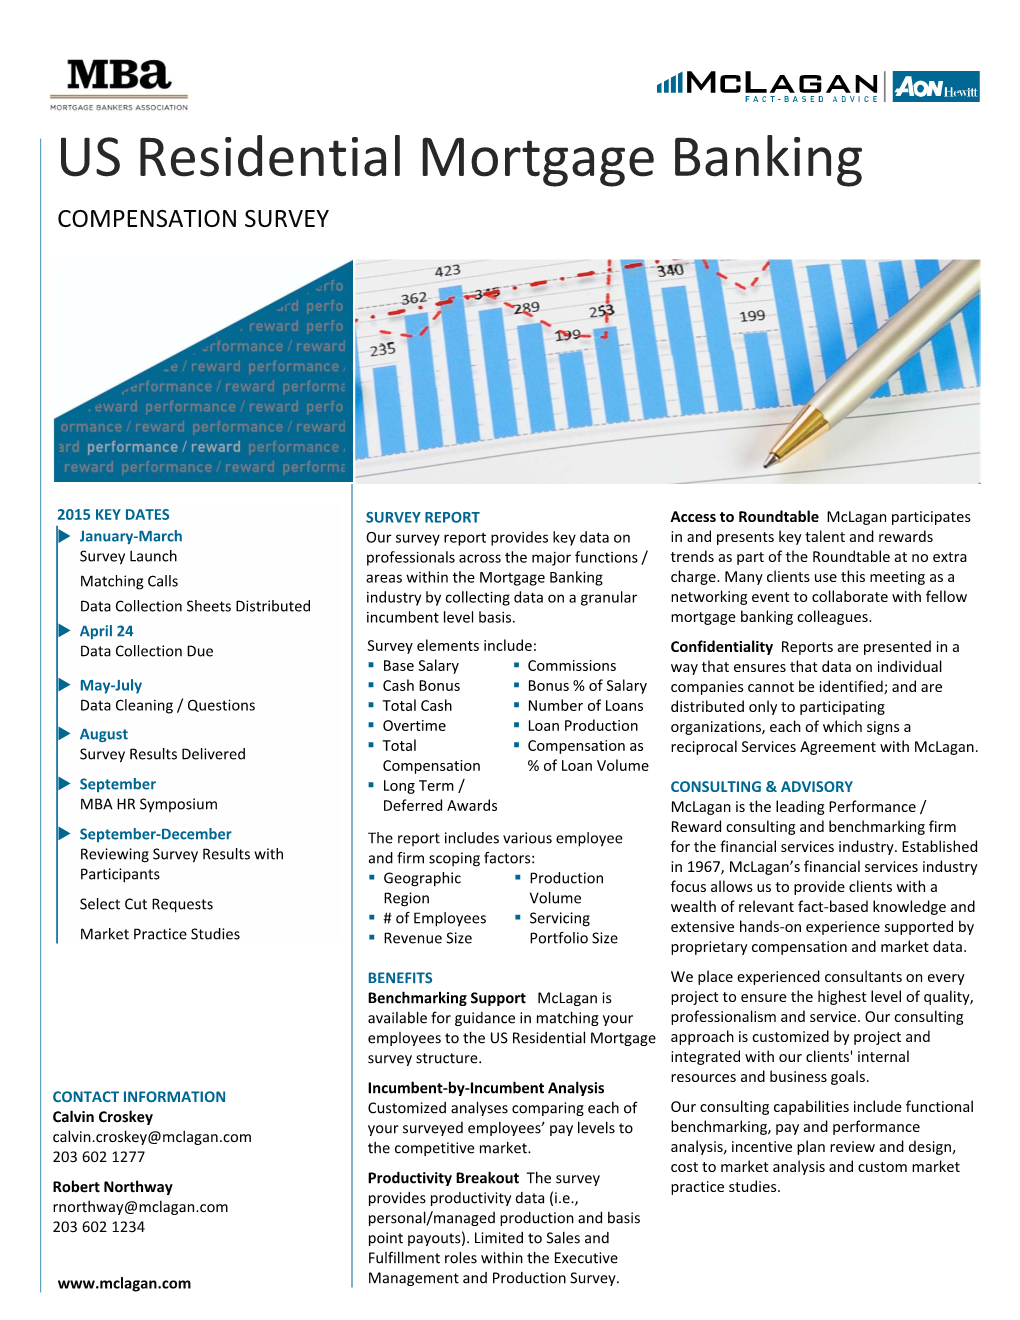 US Residential Mortgage Banking COMPENSATION SURVEY